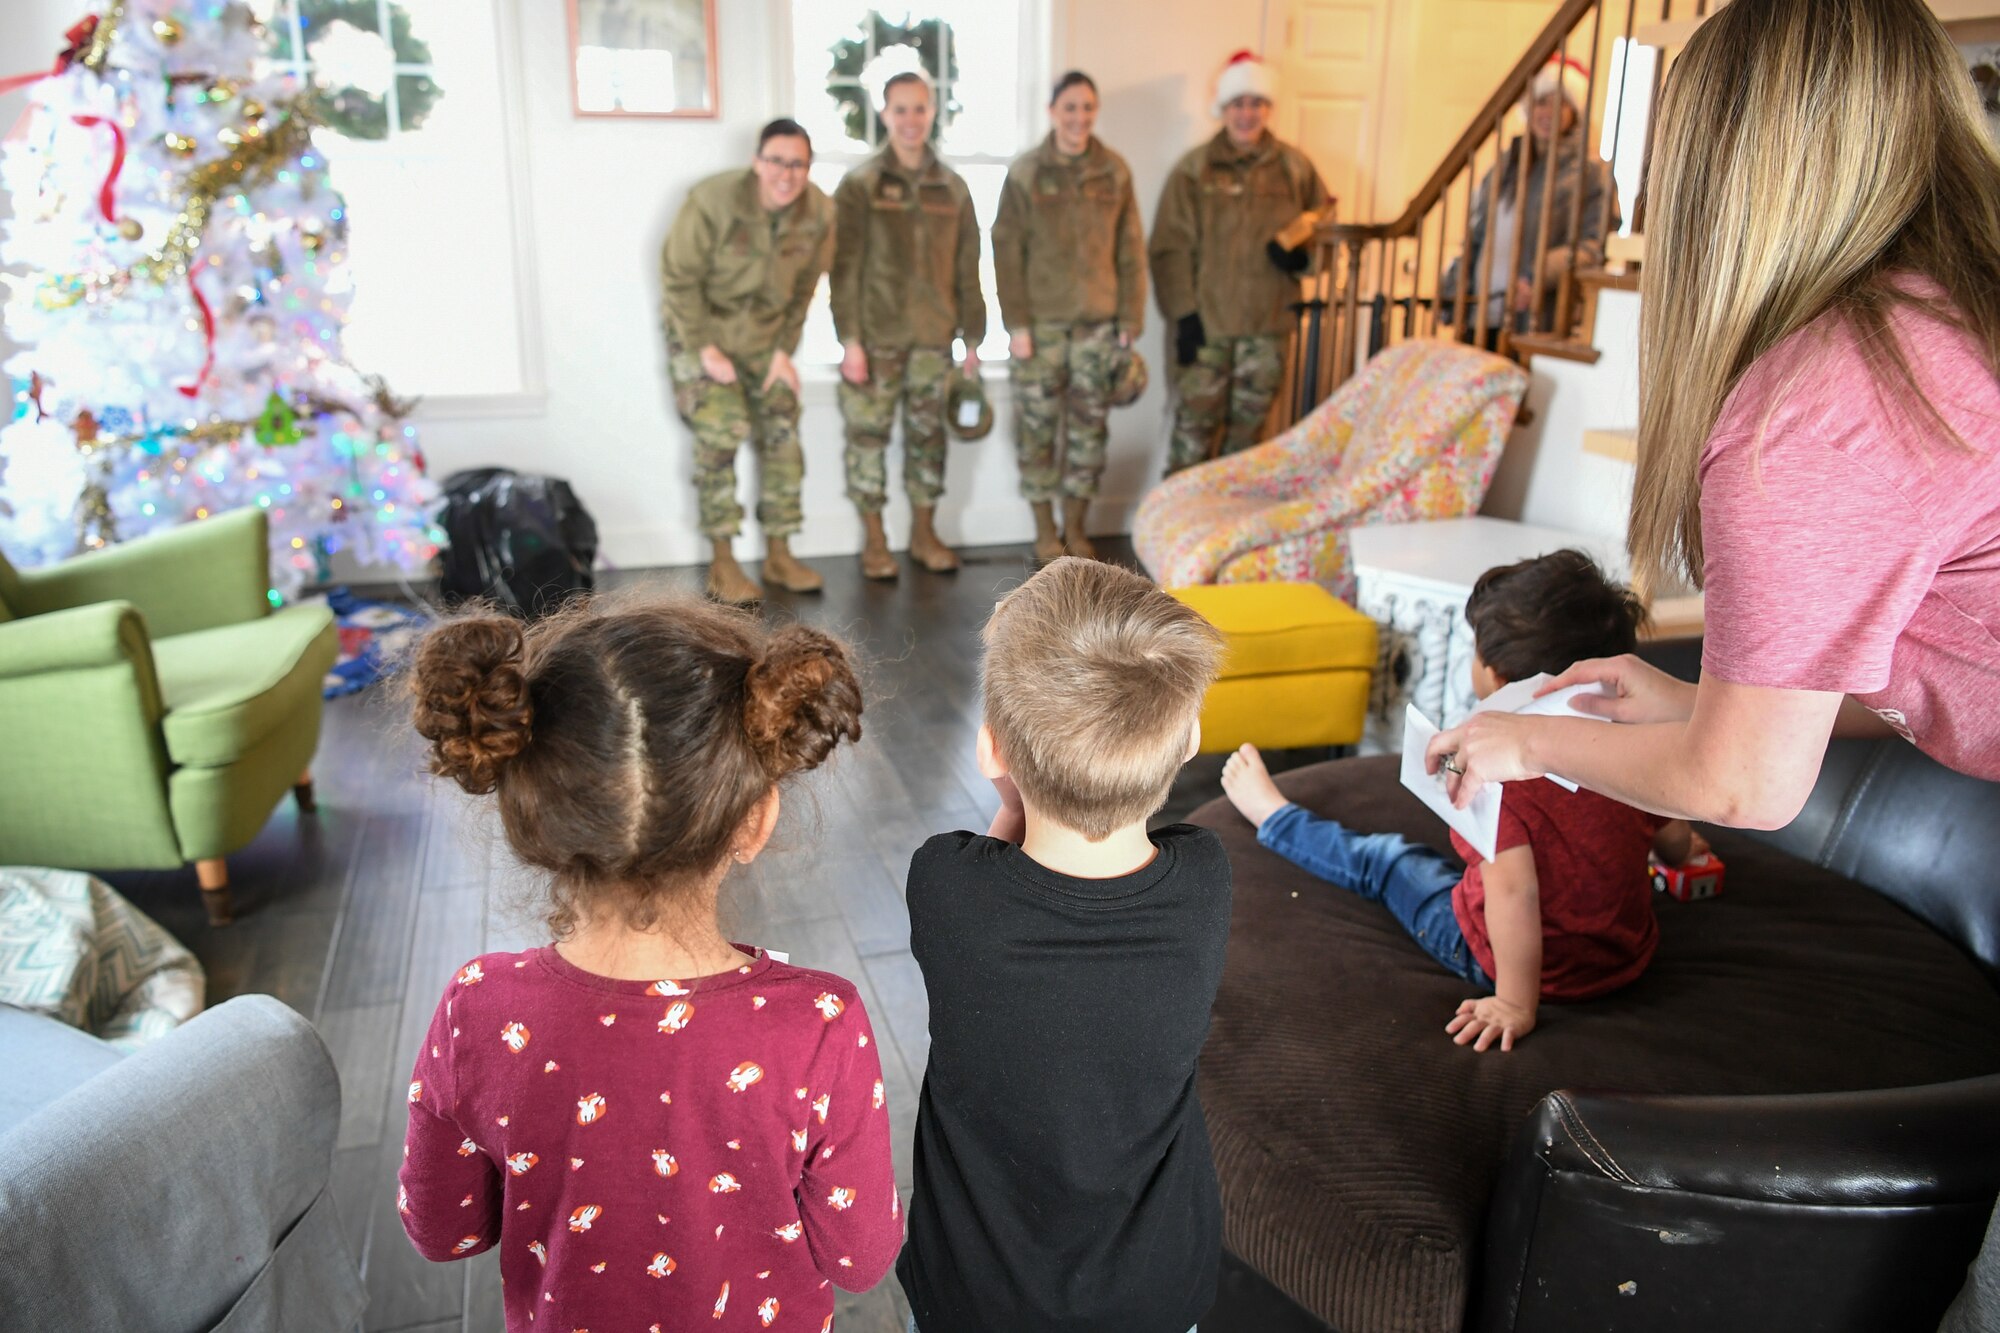 Children greet Airmen from Hill Air Force Base , Utah, as they deliver gifts Dec. 18, 2019, as part of a volunteer effort called Santa Brigade, a joint venture with Utah Foster Care Foundation.  Around 85 Airmen from various commands played Santa for the day delivering 537 gifts to over 140 foster care families around Northern Utah. (U.S. Air Force photo by Cynthia Griggs)